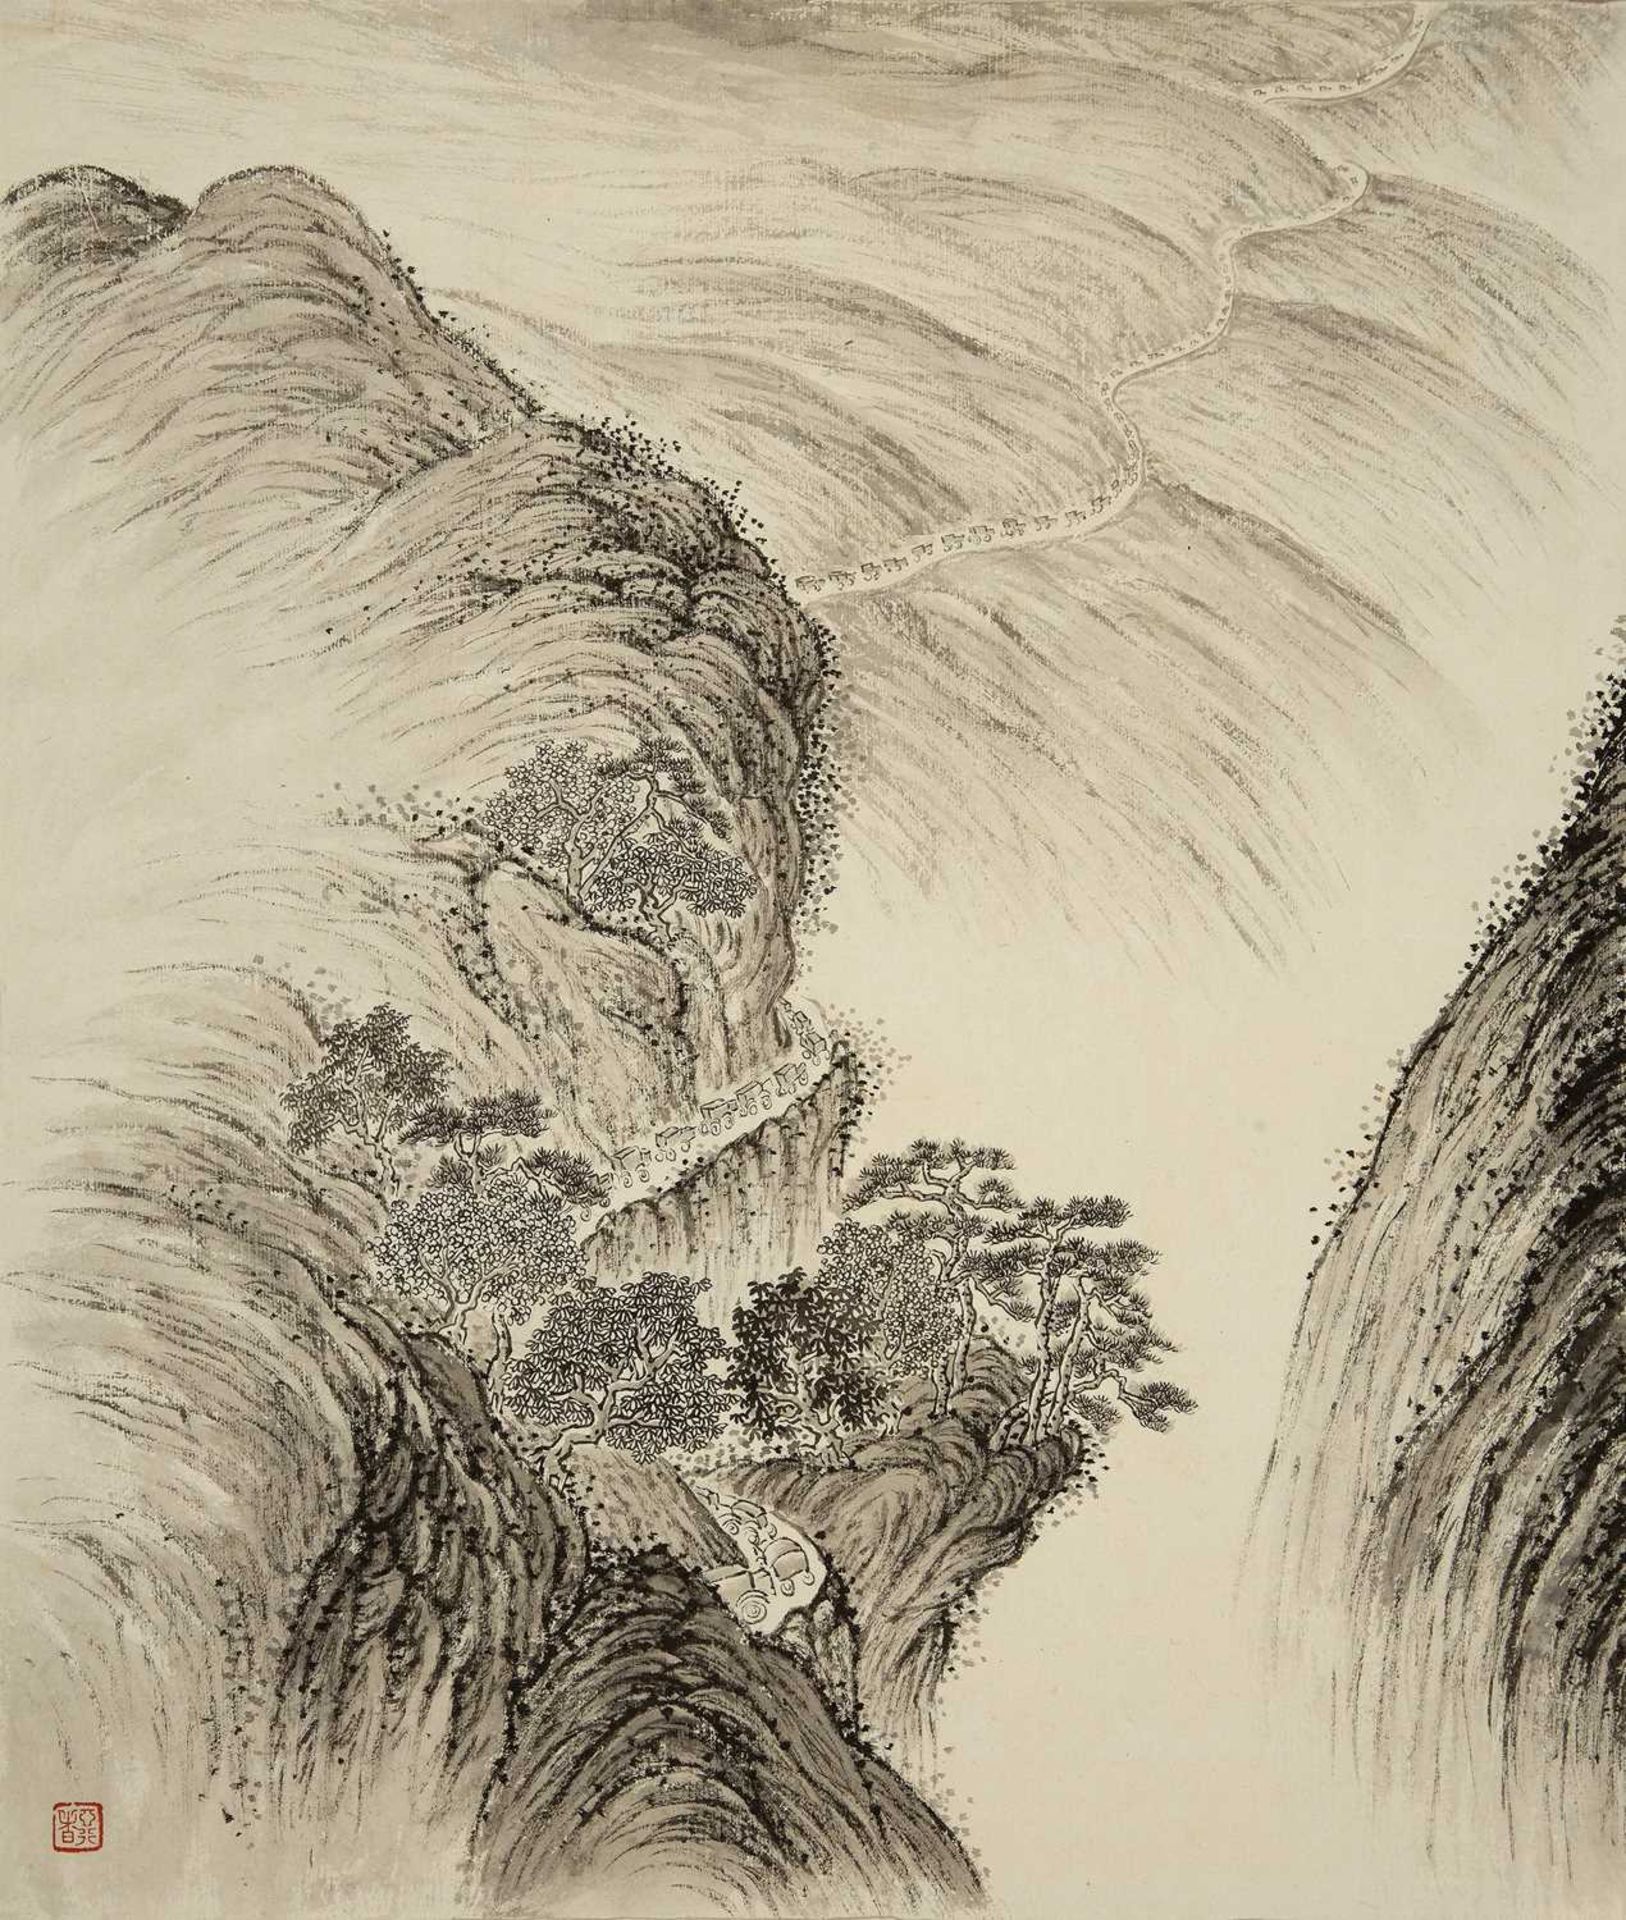 Chiang Yee (Chinese, 1903-1977) 'Vehicles in a mountain landscape', ink and wash study, signed